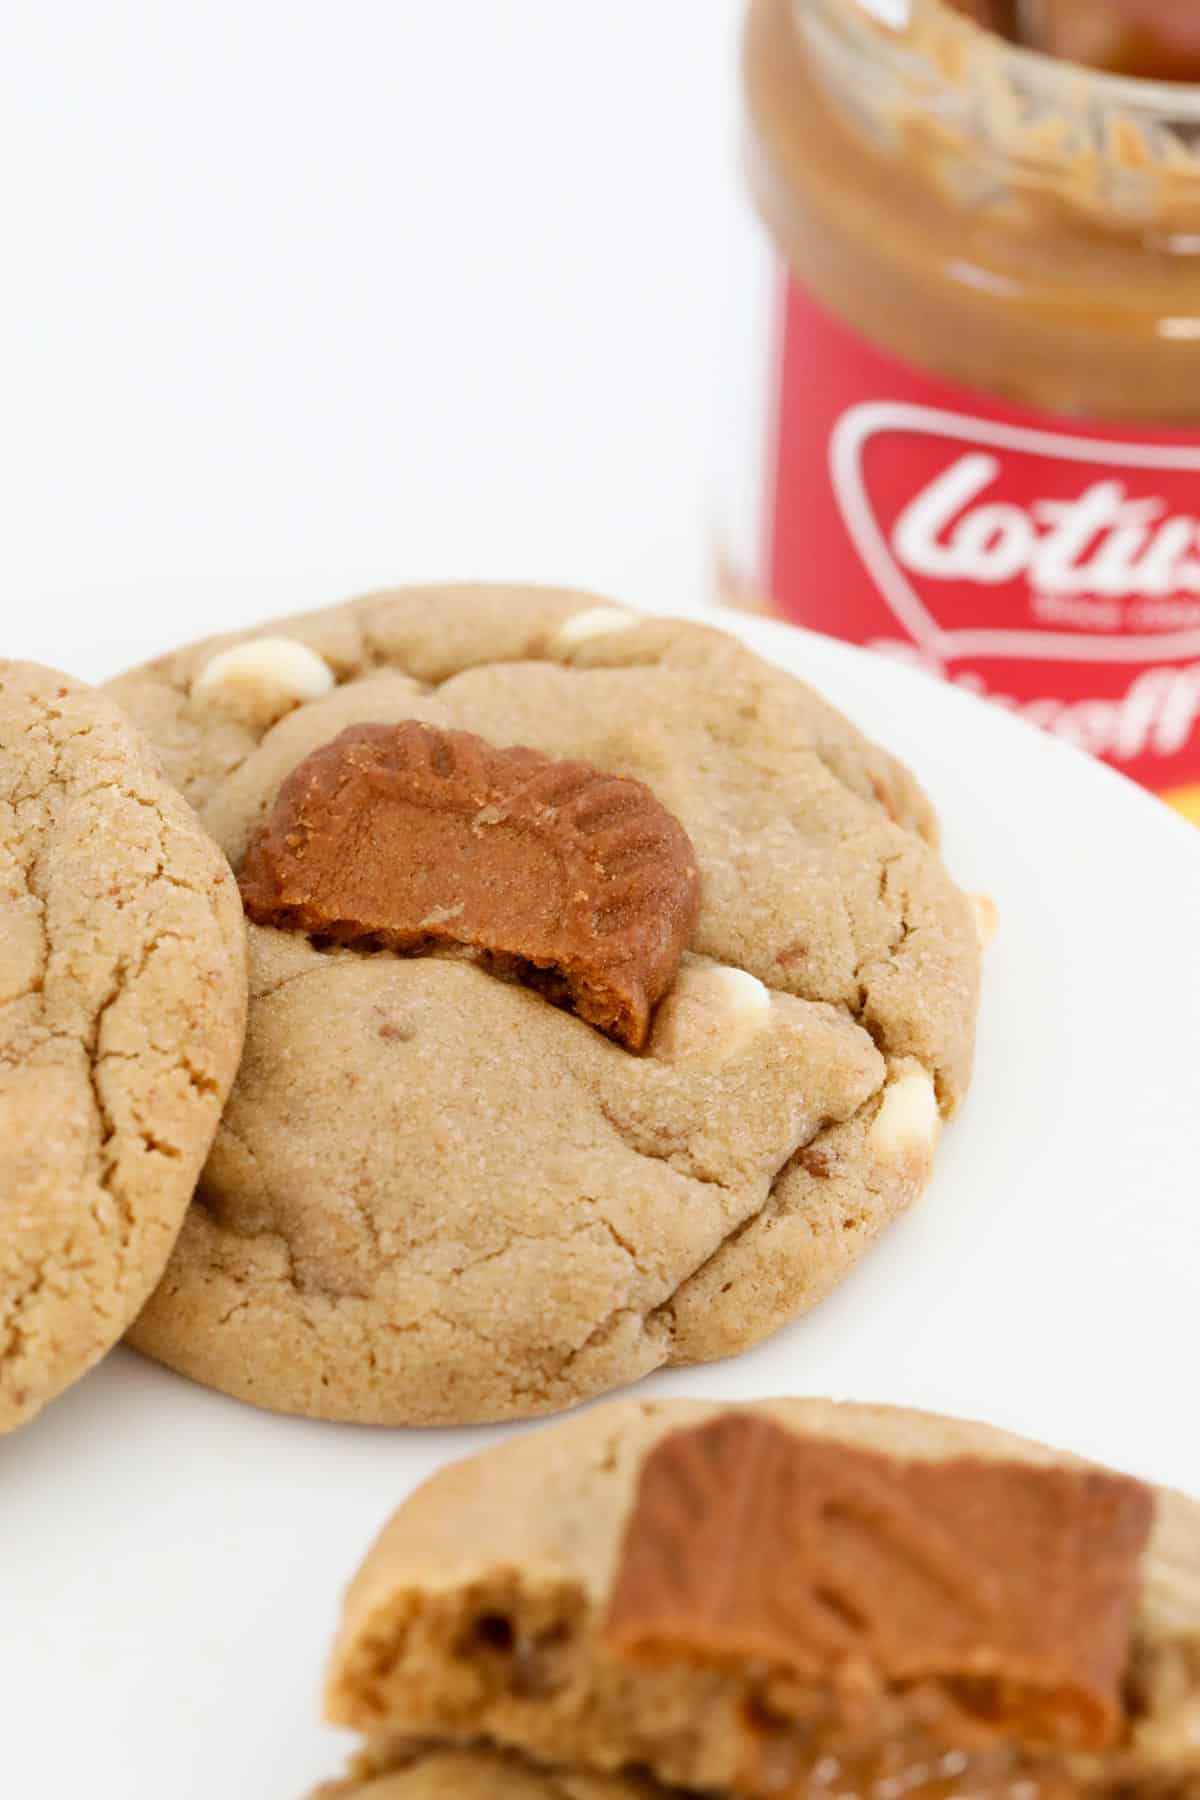 A close up of baked cookies in front of a jar of Biscoff spread.